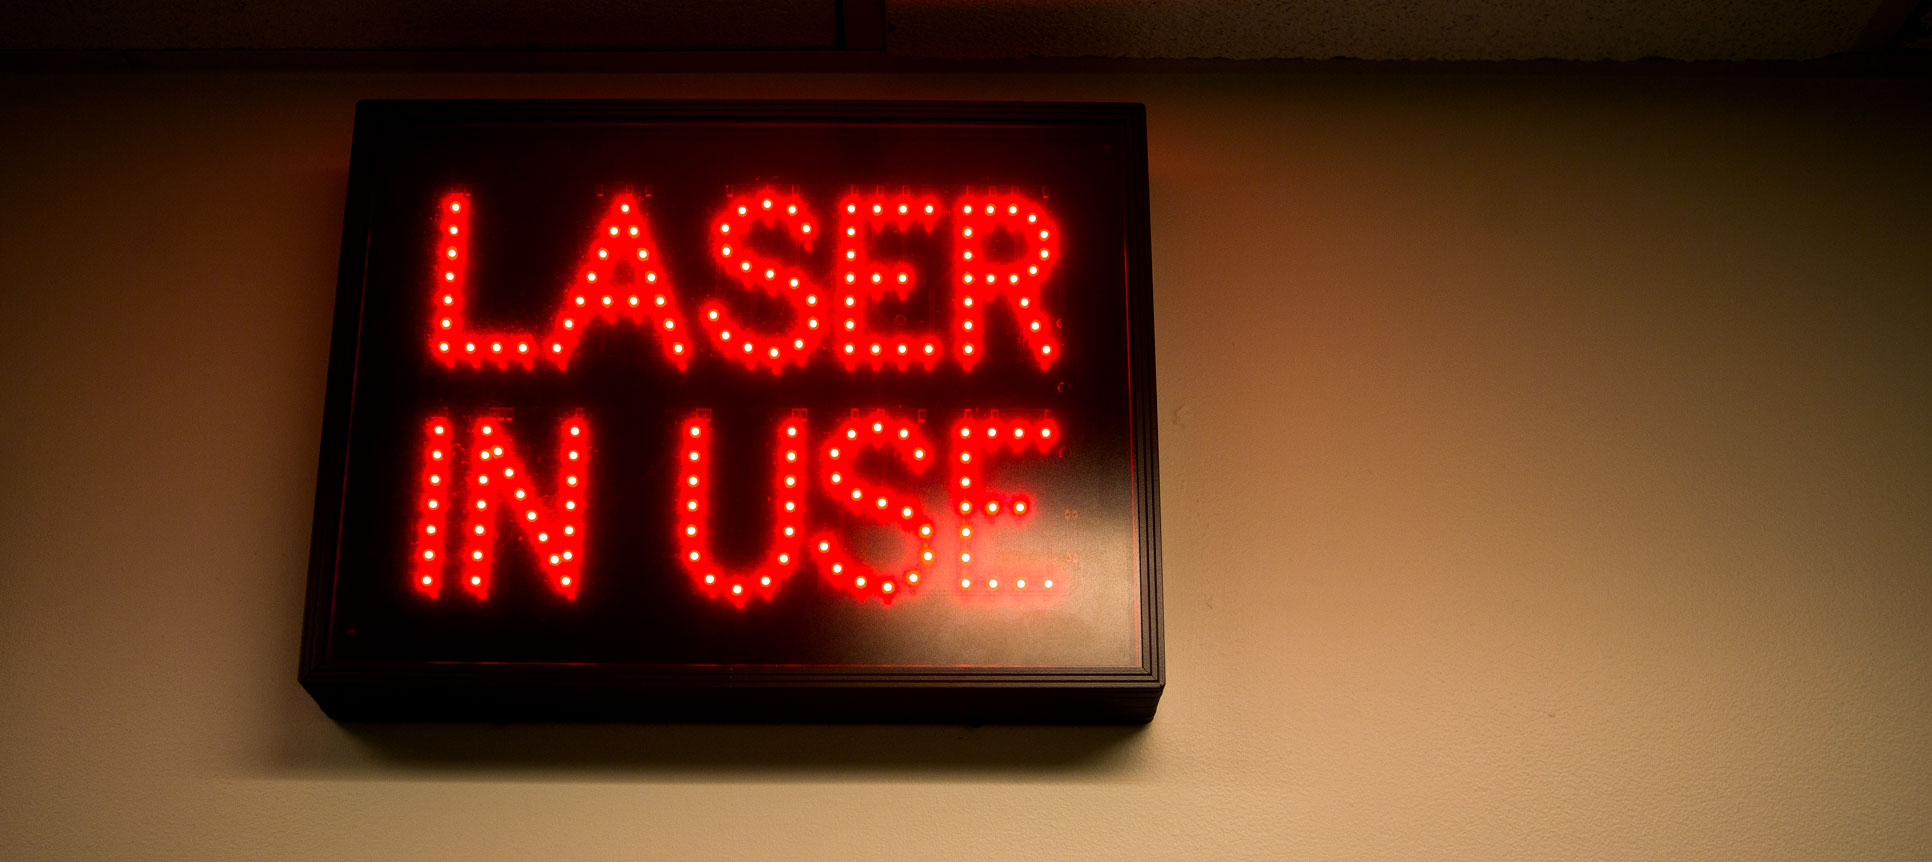 A "Laser in Use" sign lights up